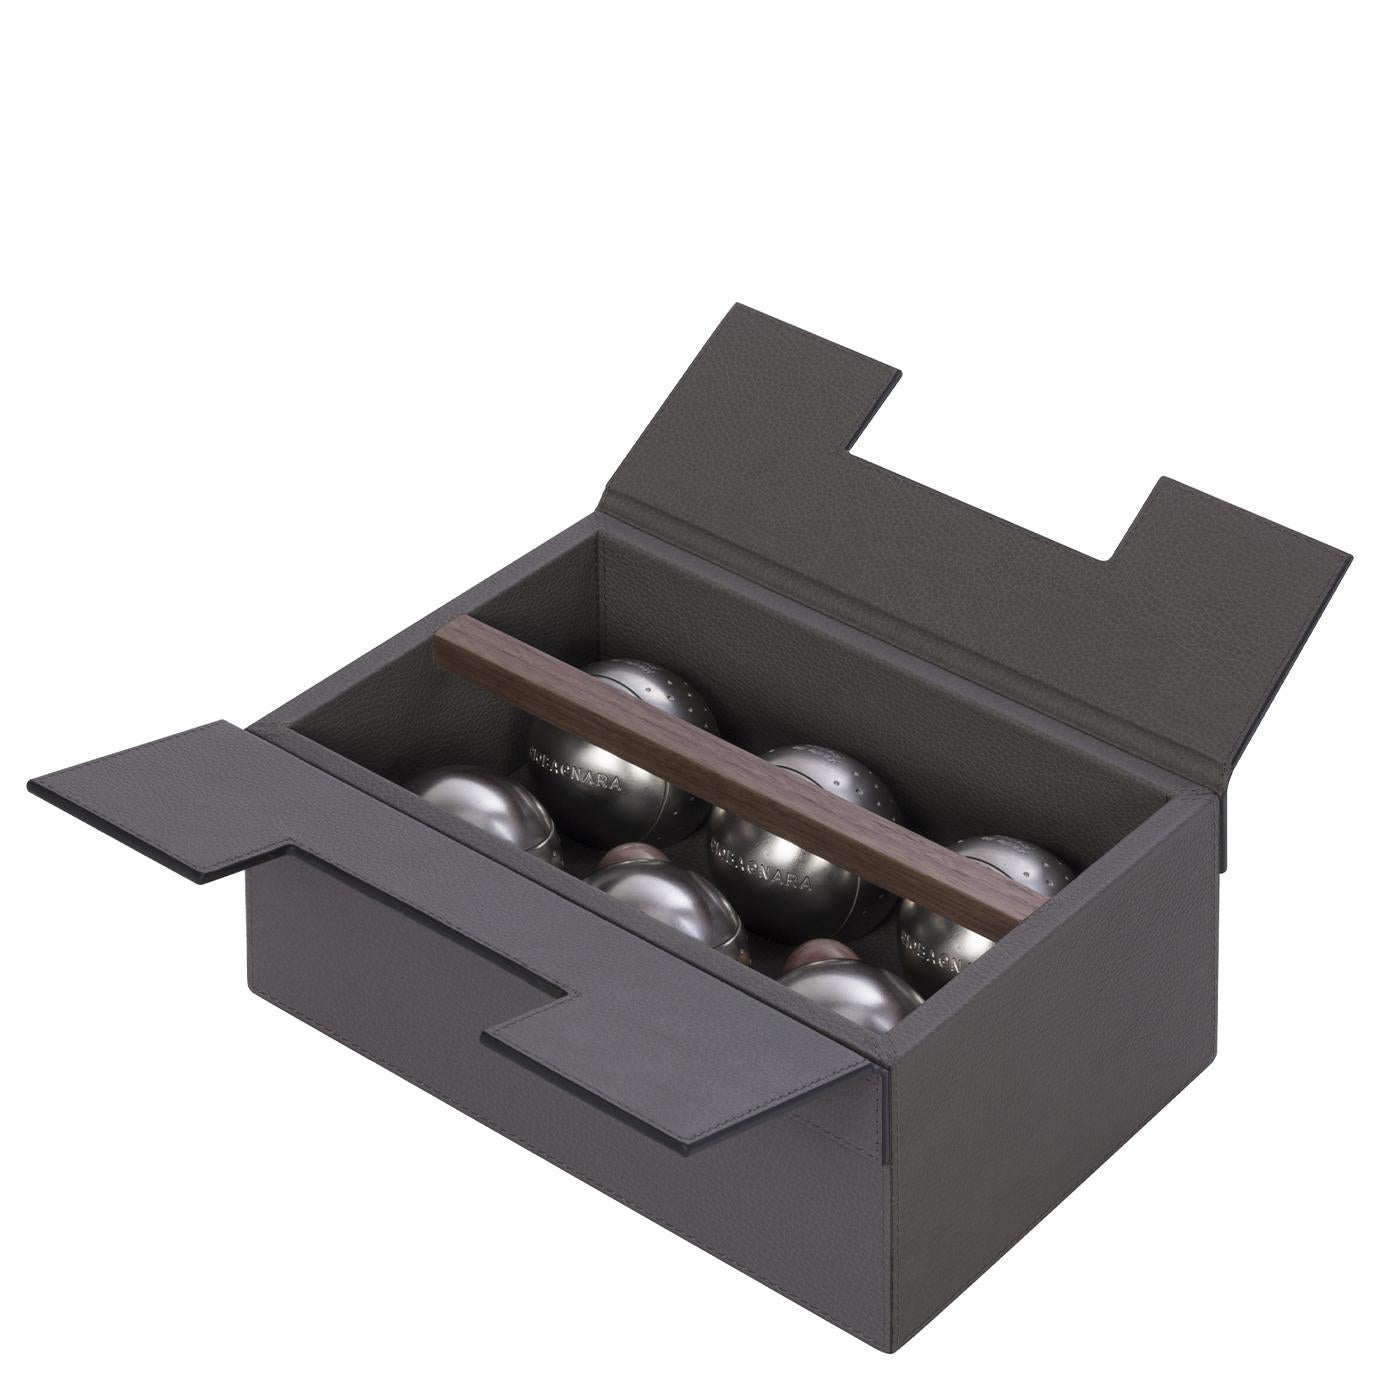 Composed of six heavy stainless steel balls and two wooden jacks that serve as target balls, this exquisite bocce set comes in an elegant and original gray leather-covered wood box embellished with a solid walnut wood handle. This popular